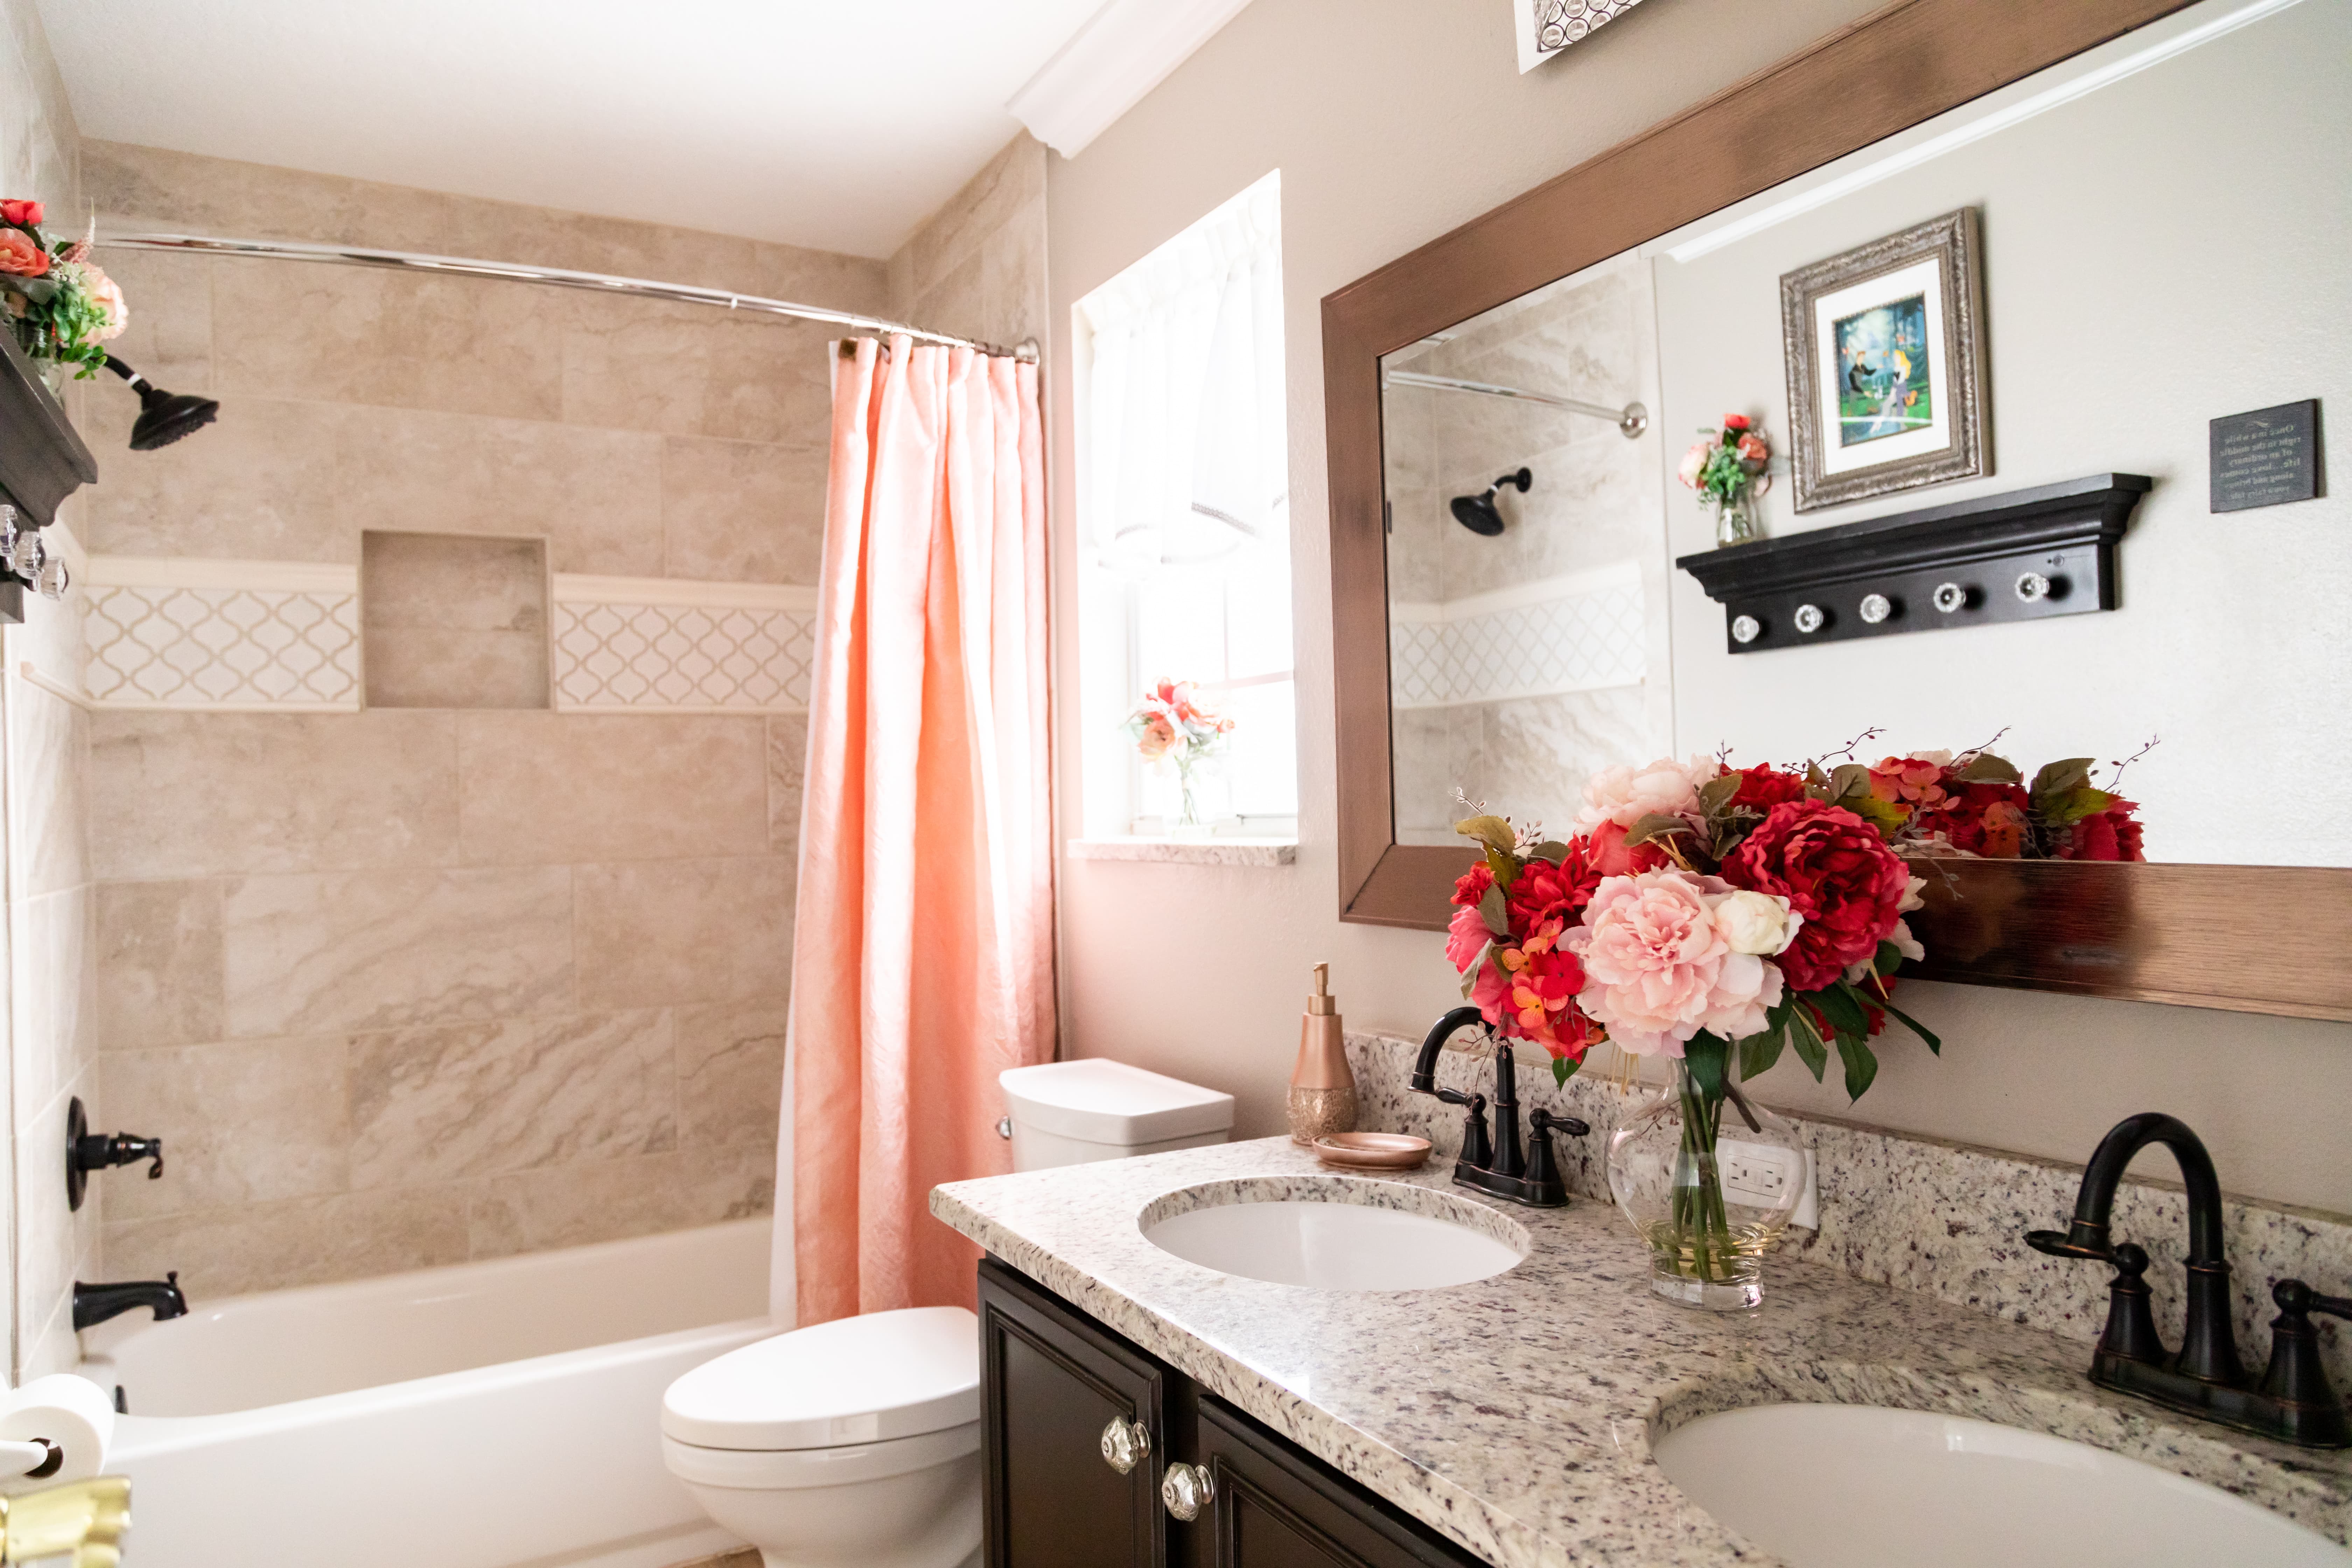 With a luxurious shower/bathtub combo and double sinks, this bathroom is perfect for families!